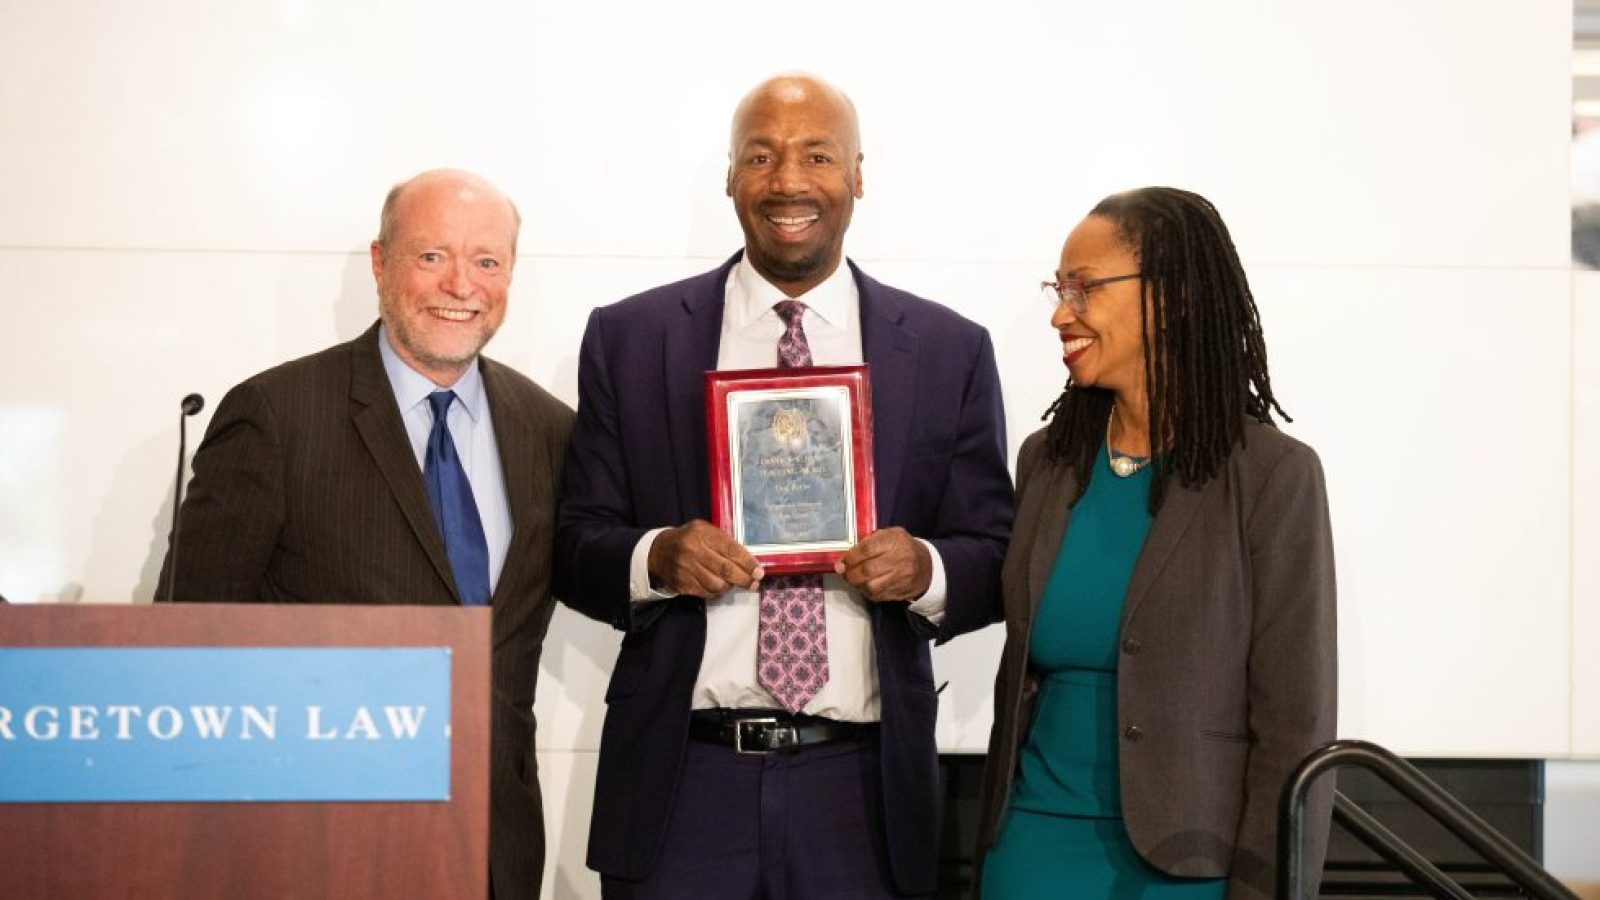 Three members of Georgetown Law stand beside a podium. The professor in the middle holds an award and smiles, wearing a black suit with a tie. The professor on the right wears a blue dress and a blazer, and the Law School Dean on the left wears a black suit and a blue tie.